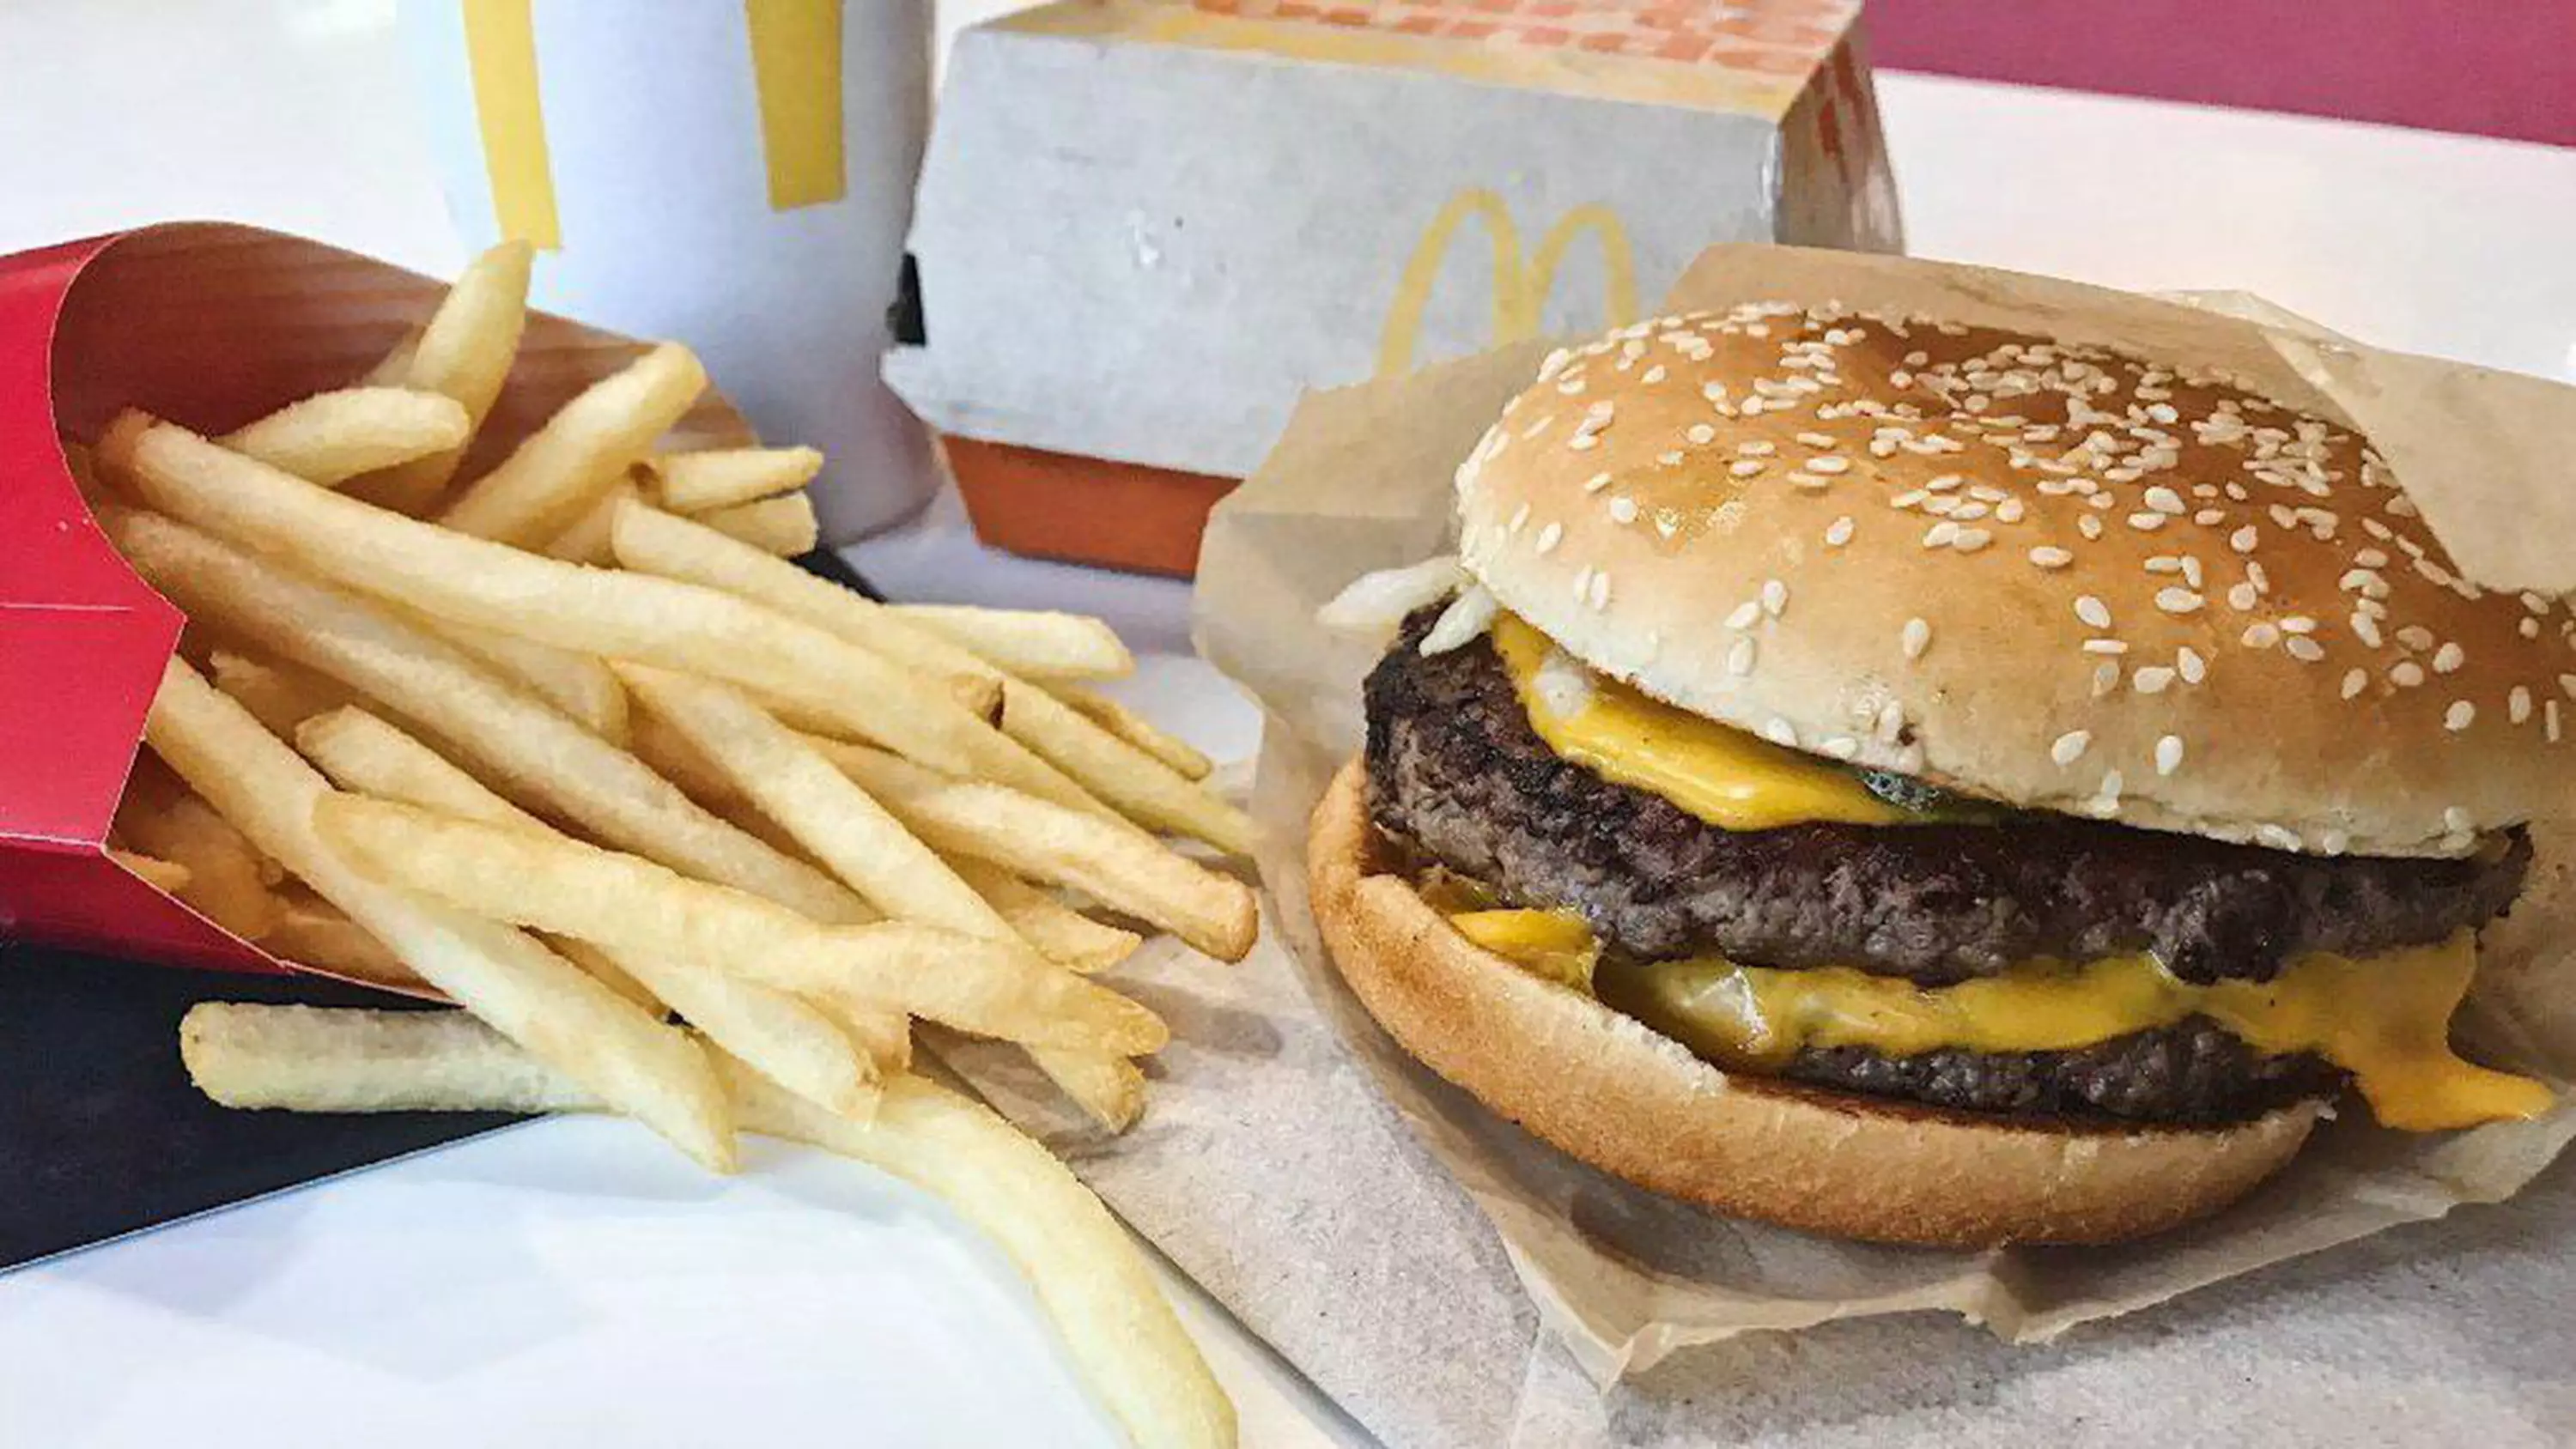 The fast food giant is offering it's famous Big Mac burger for 99p. (